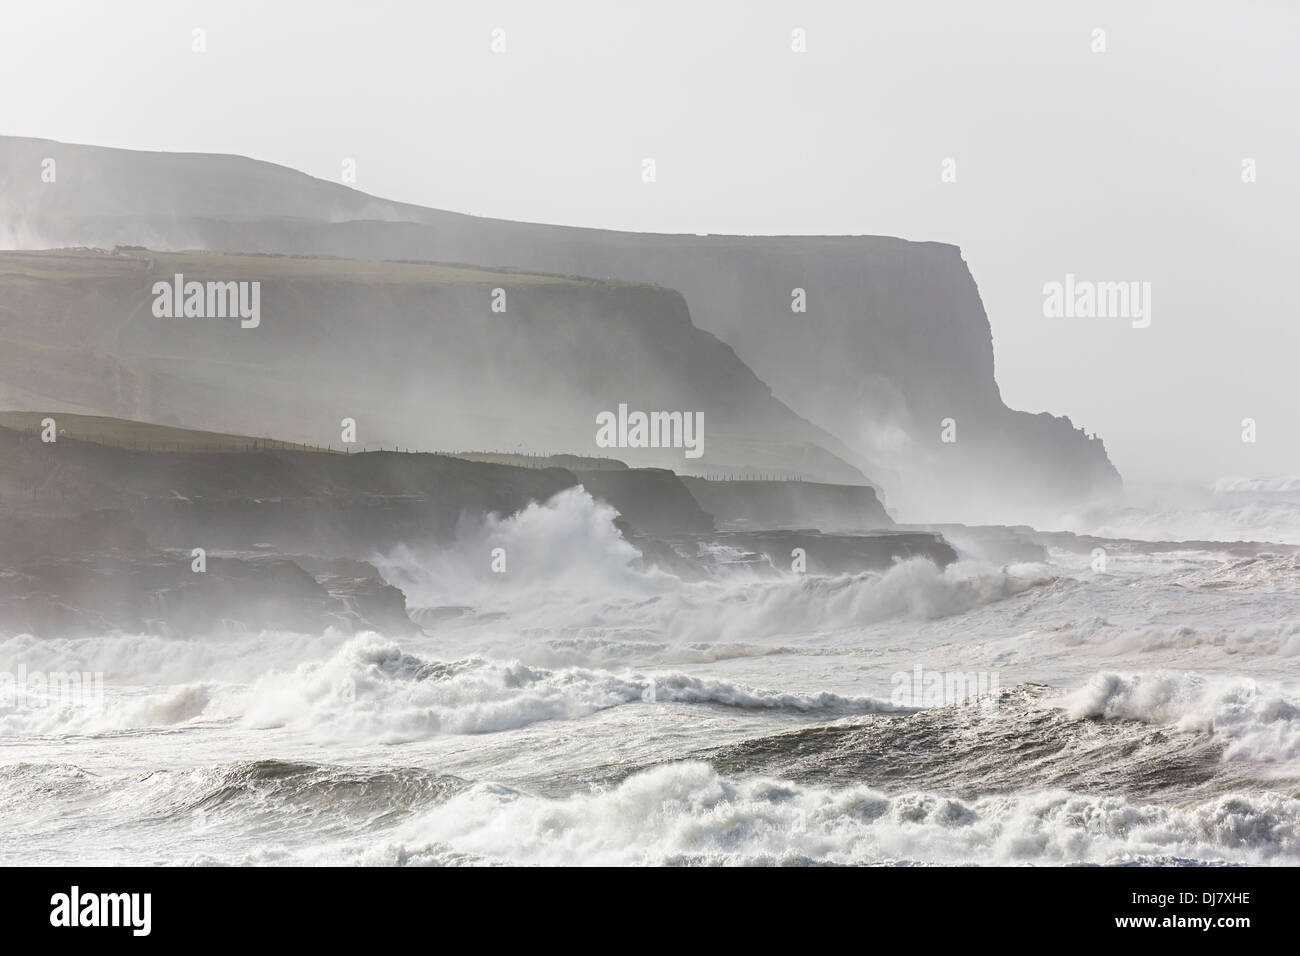 Storm waves at Doolin with the Cliffs of Moher in background, Co. Clare, Ireland Stock Photo